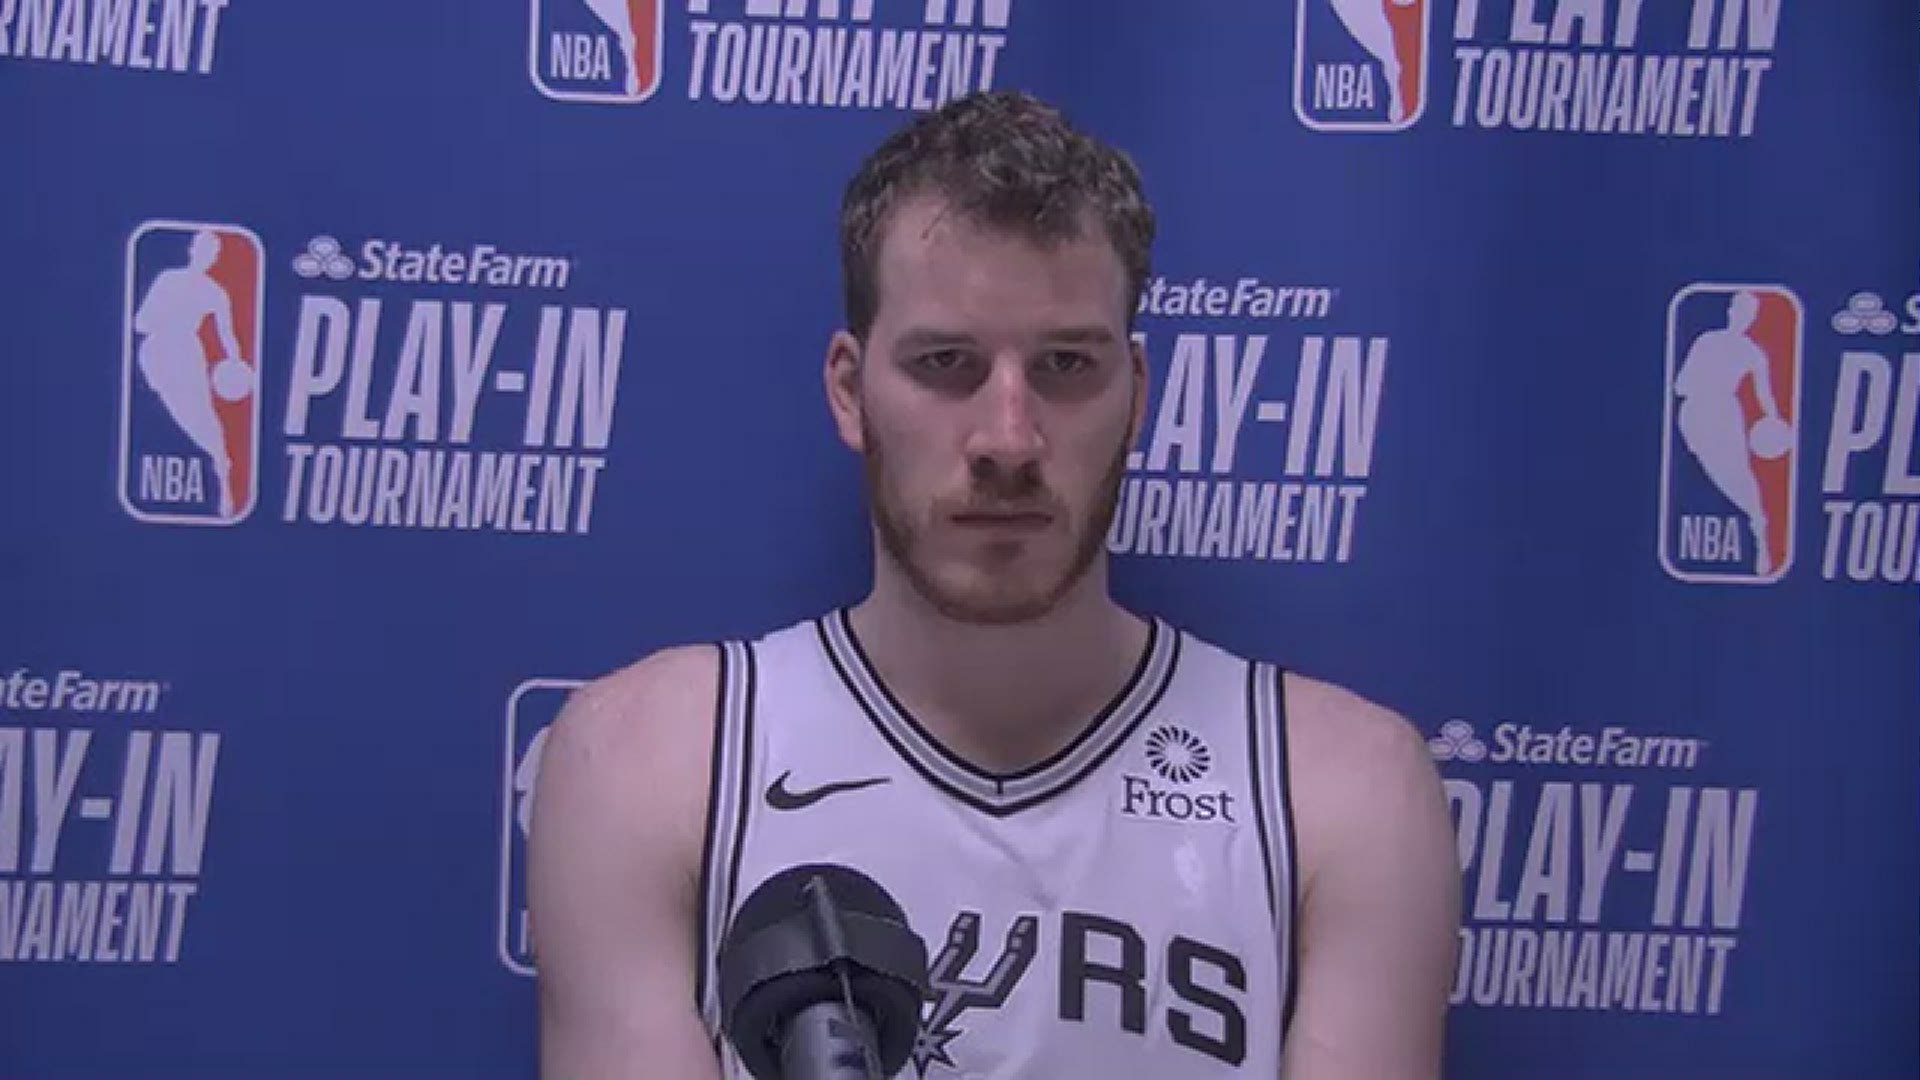 Poeltl talked about where he sees San Antonio's young core going from here, and said he'd like to see the veterans back.